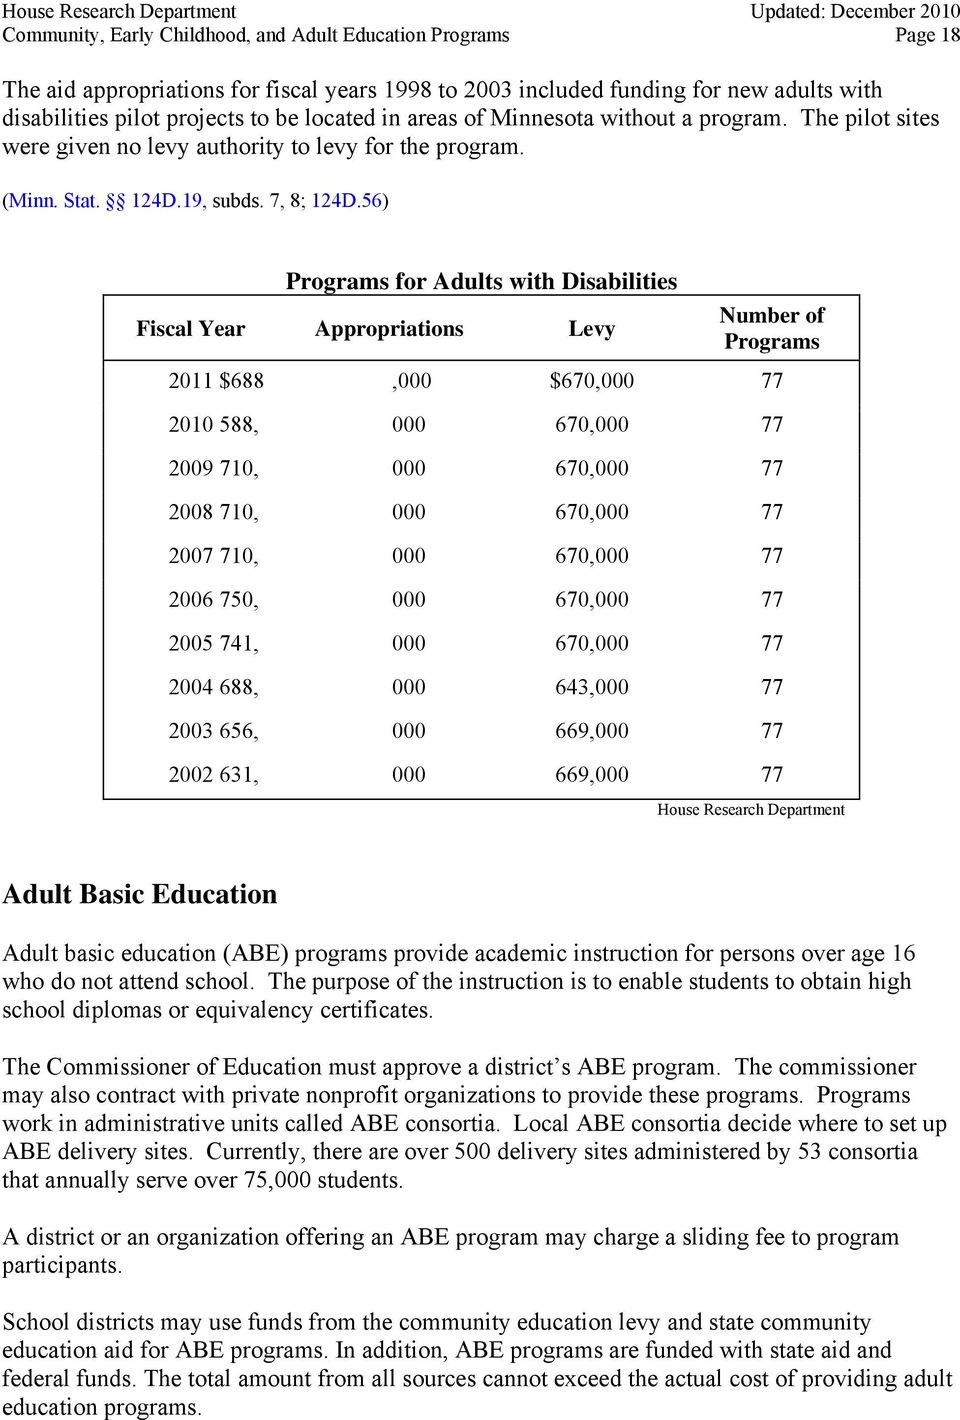 56) Programs for Adults with Disabilities Fiscal Year Appropriations Levy Number of Programs 2011 $688,000 $670,000 77 2010 588, 000 670,000 77 2009 710, 000 670,000 77 2008 710, 000 670,000 77 2007